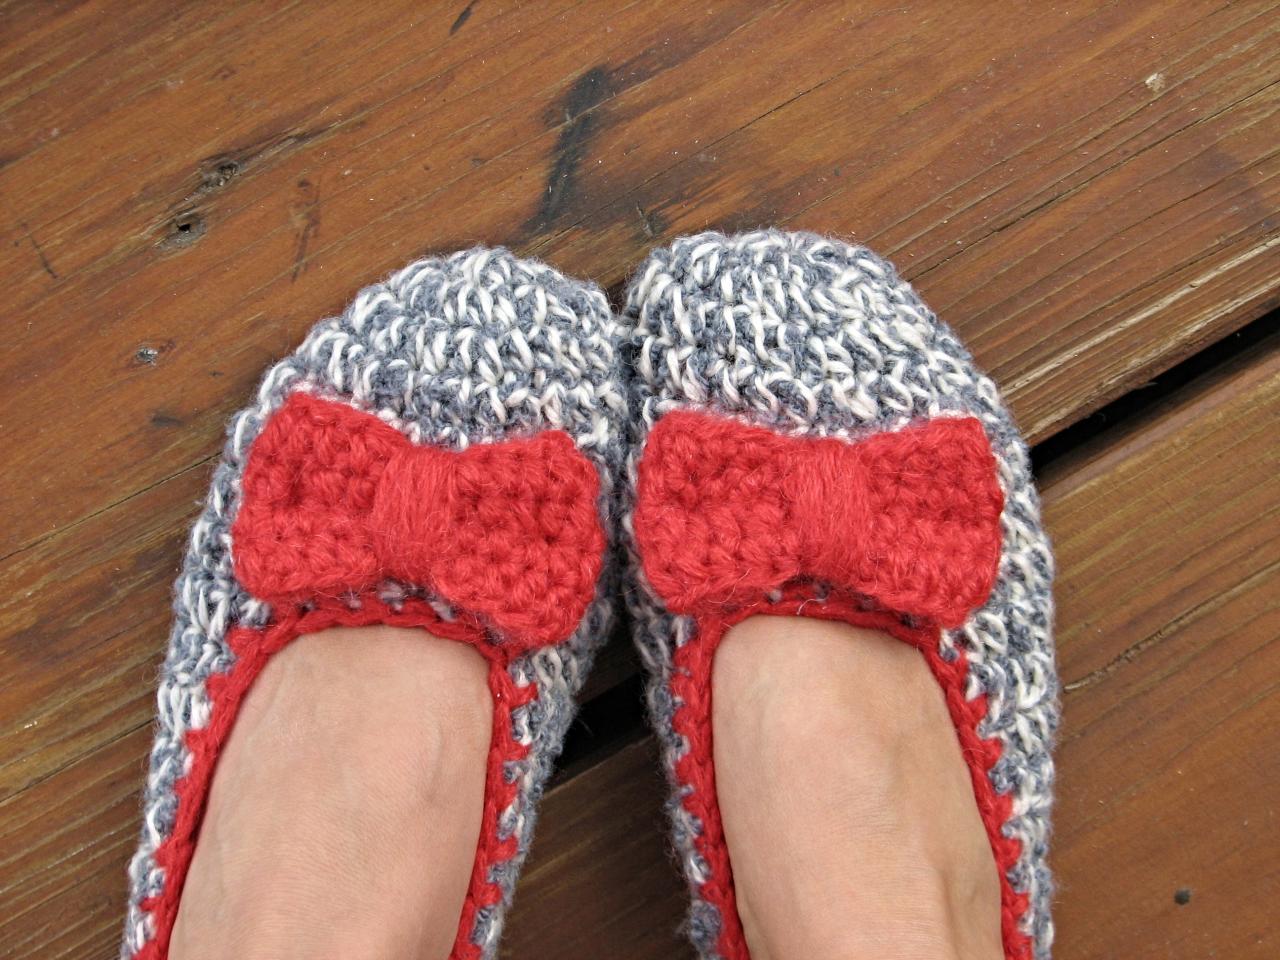 Crochet Women Slippers With Red Bow, Accessories, Adult Crochet Slippers, Home Shoes, Crochet Women Slippers